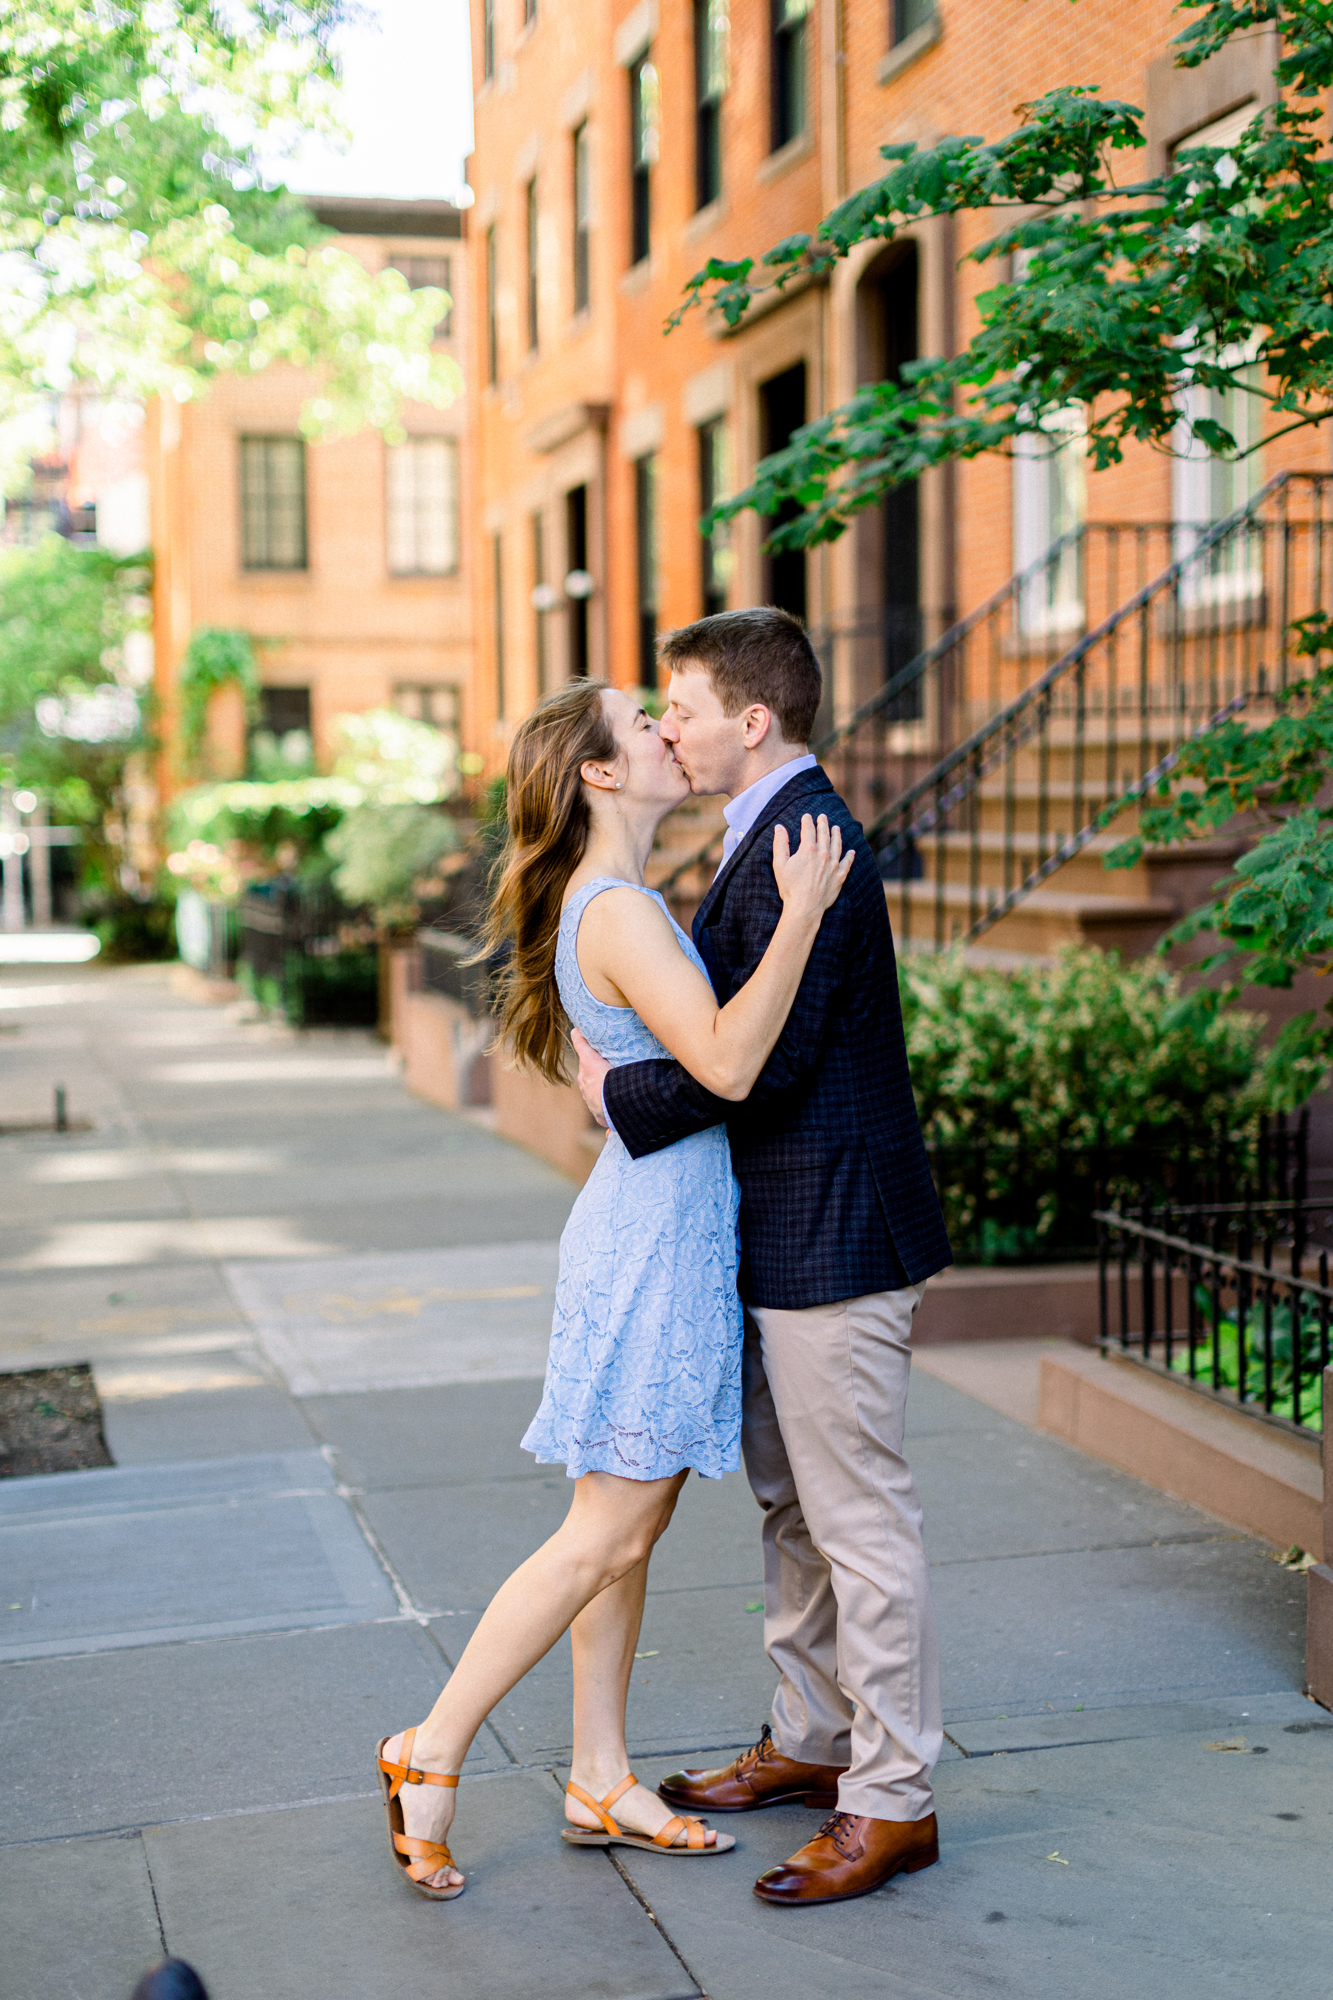 Awesome New York Engagement Photos